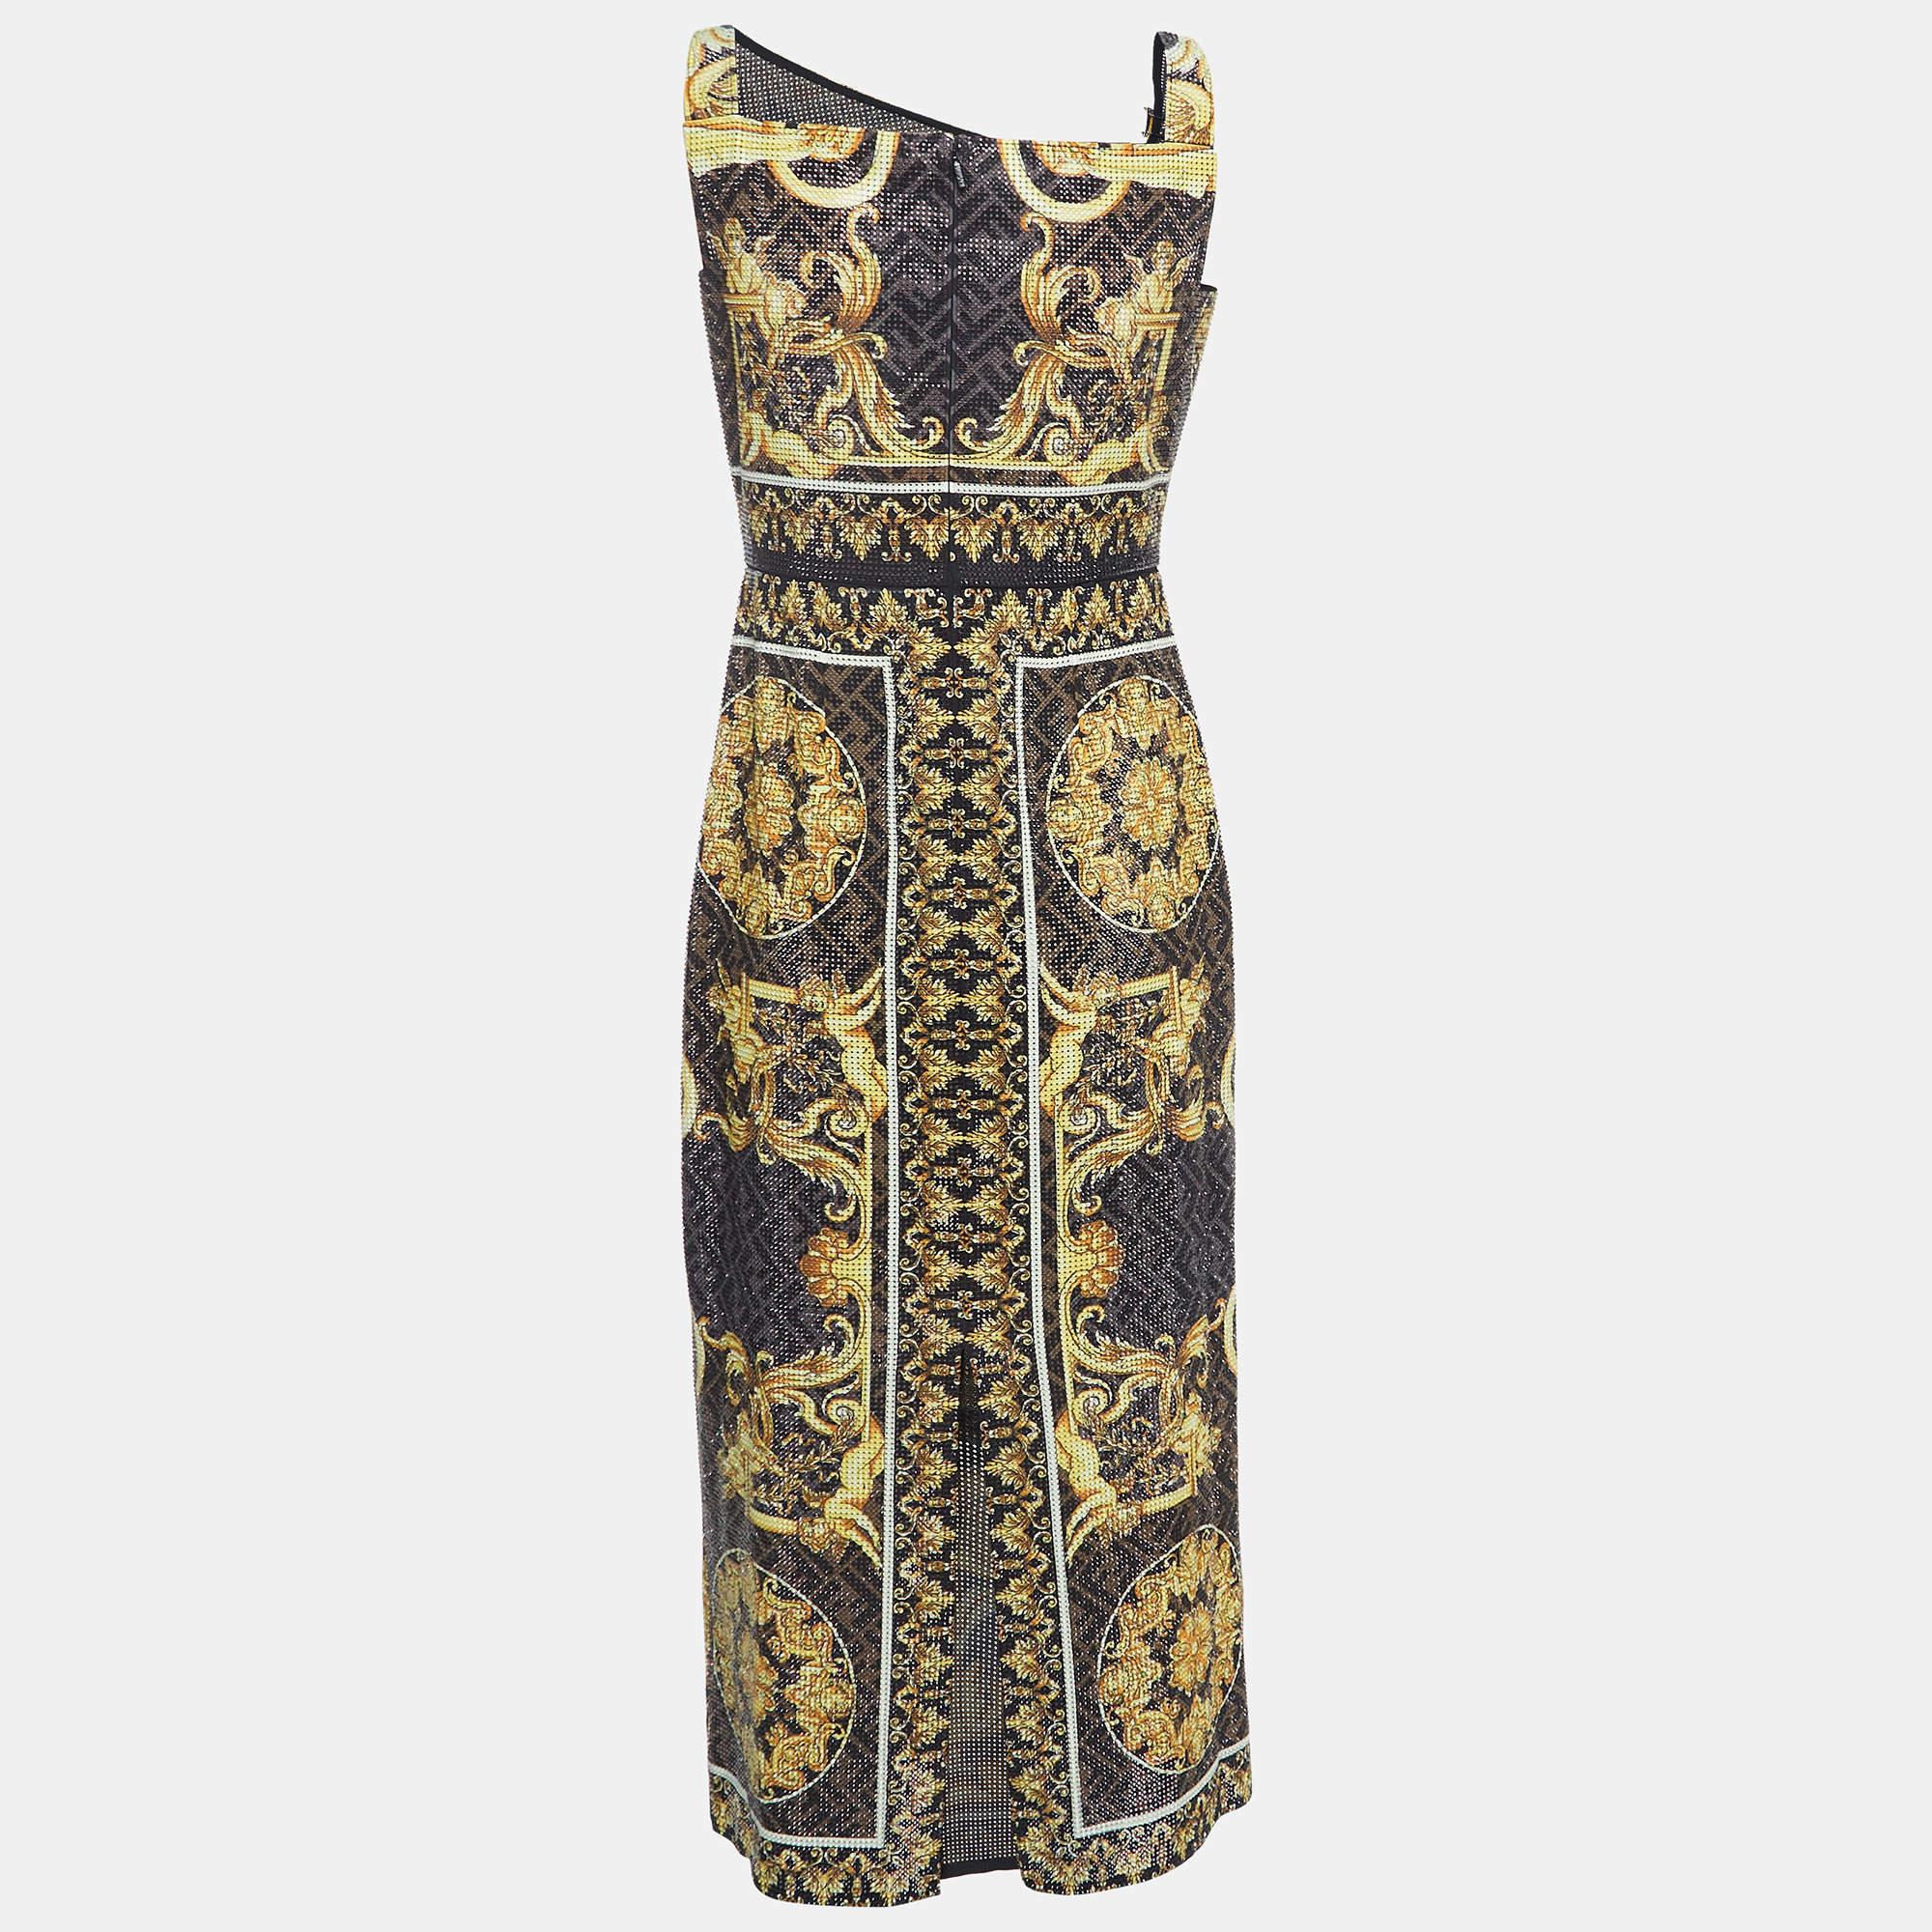 Characteristically statement-making and timelessly elegant. this dress from the Fendi X Versace collaboration presents beauty through high-quality materials and fine tailoring. It has a Zucca with Baroque detailing all over with the company of